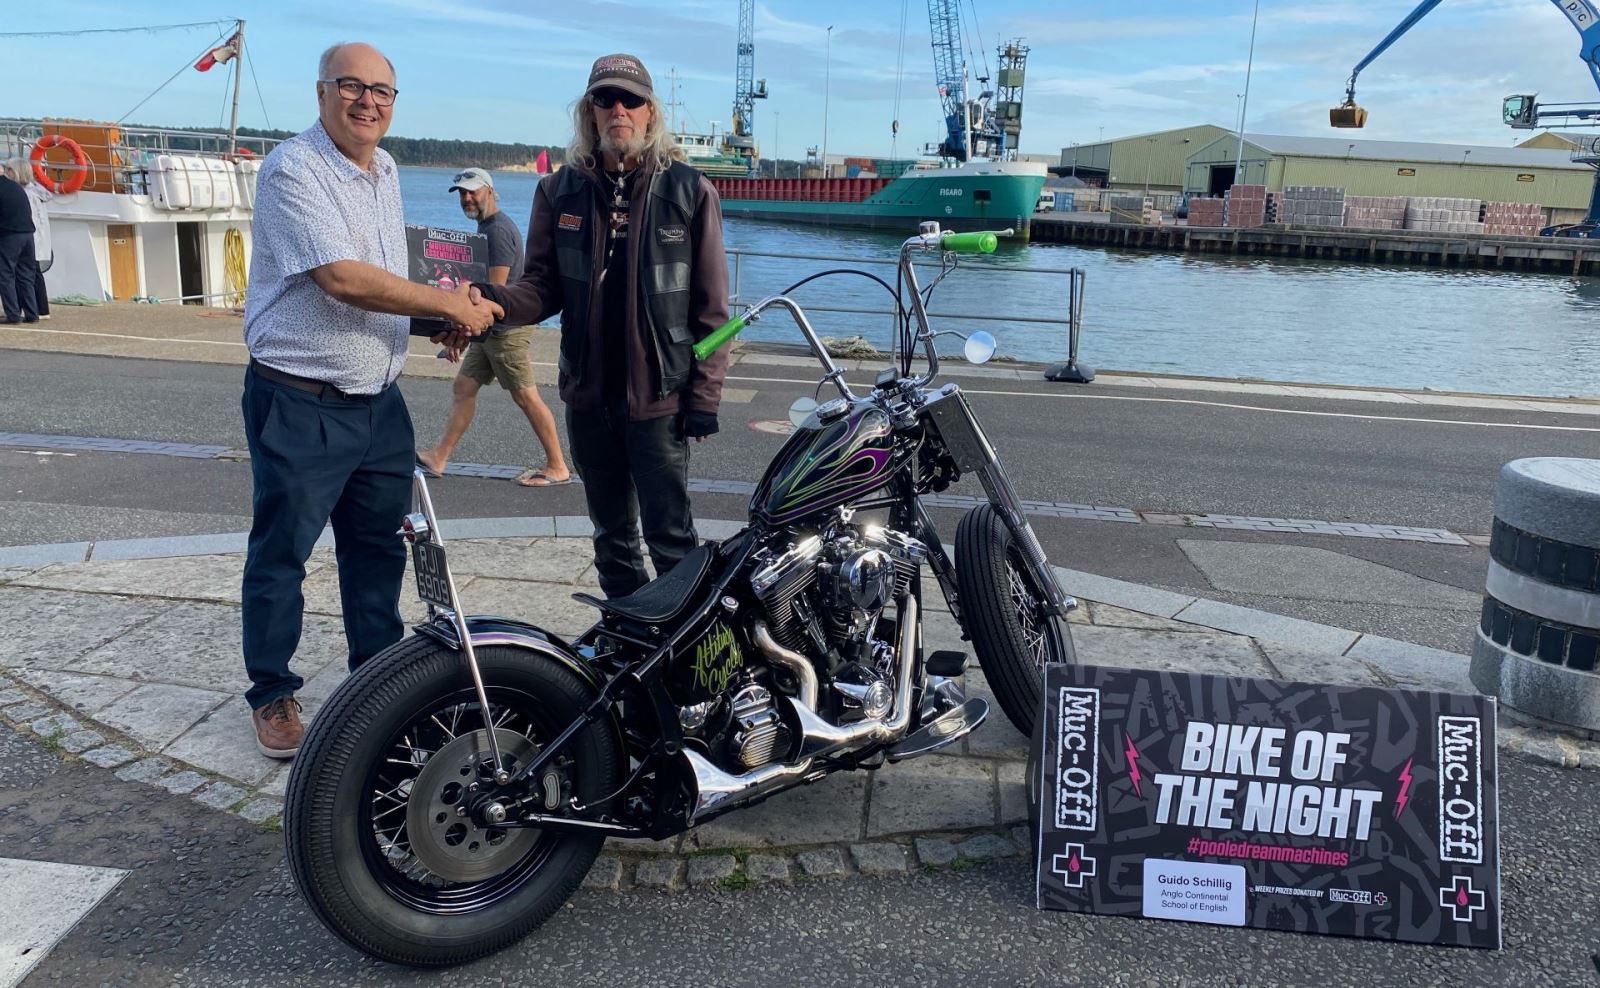 Two men shaking hands on Poole Quay during bike night